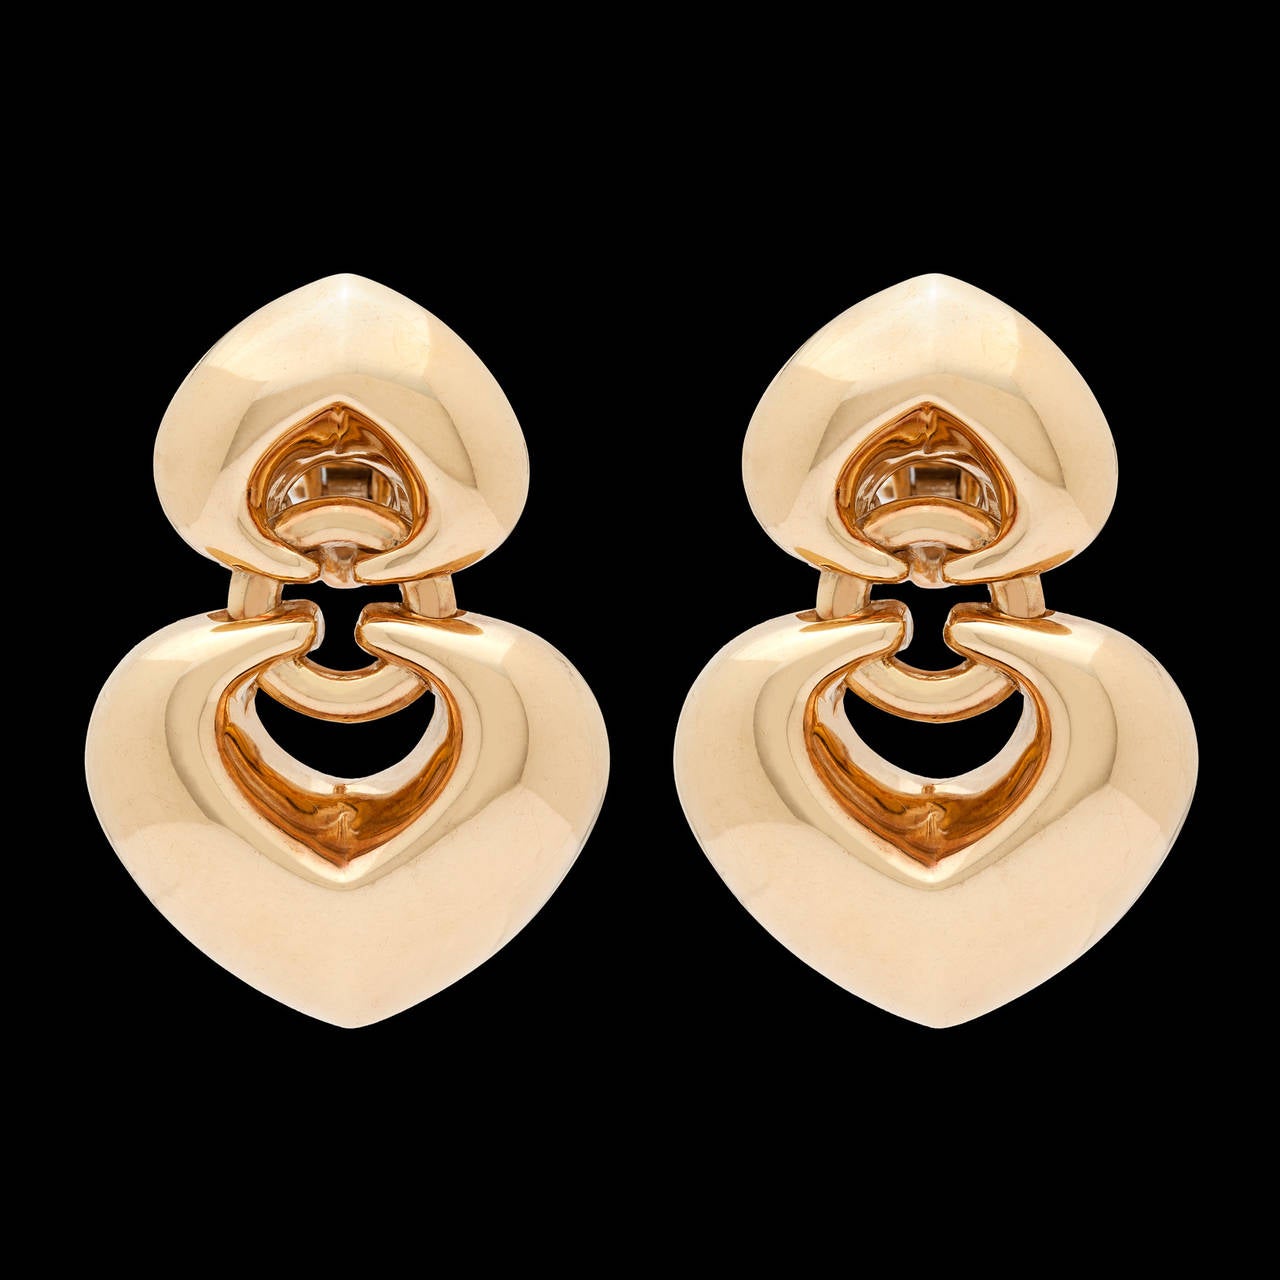 Bulgari 18Kt Yellow Gold Double Heart Earrings, circa 1980s, with Posts & Omega Clips. The earrings measure approximately 1.25 inches long and .75 inches wide. Total weight of the pair is 19.4 grams.